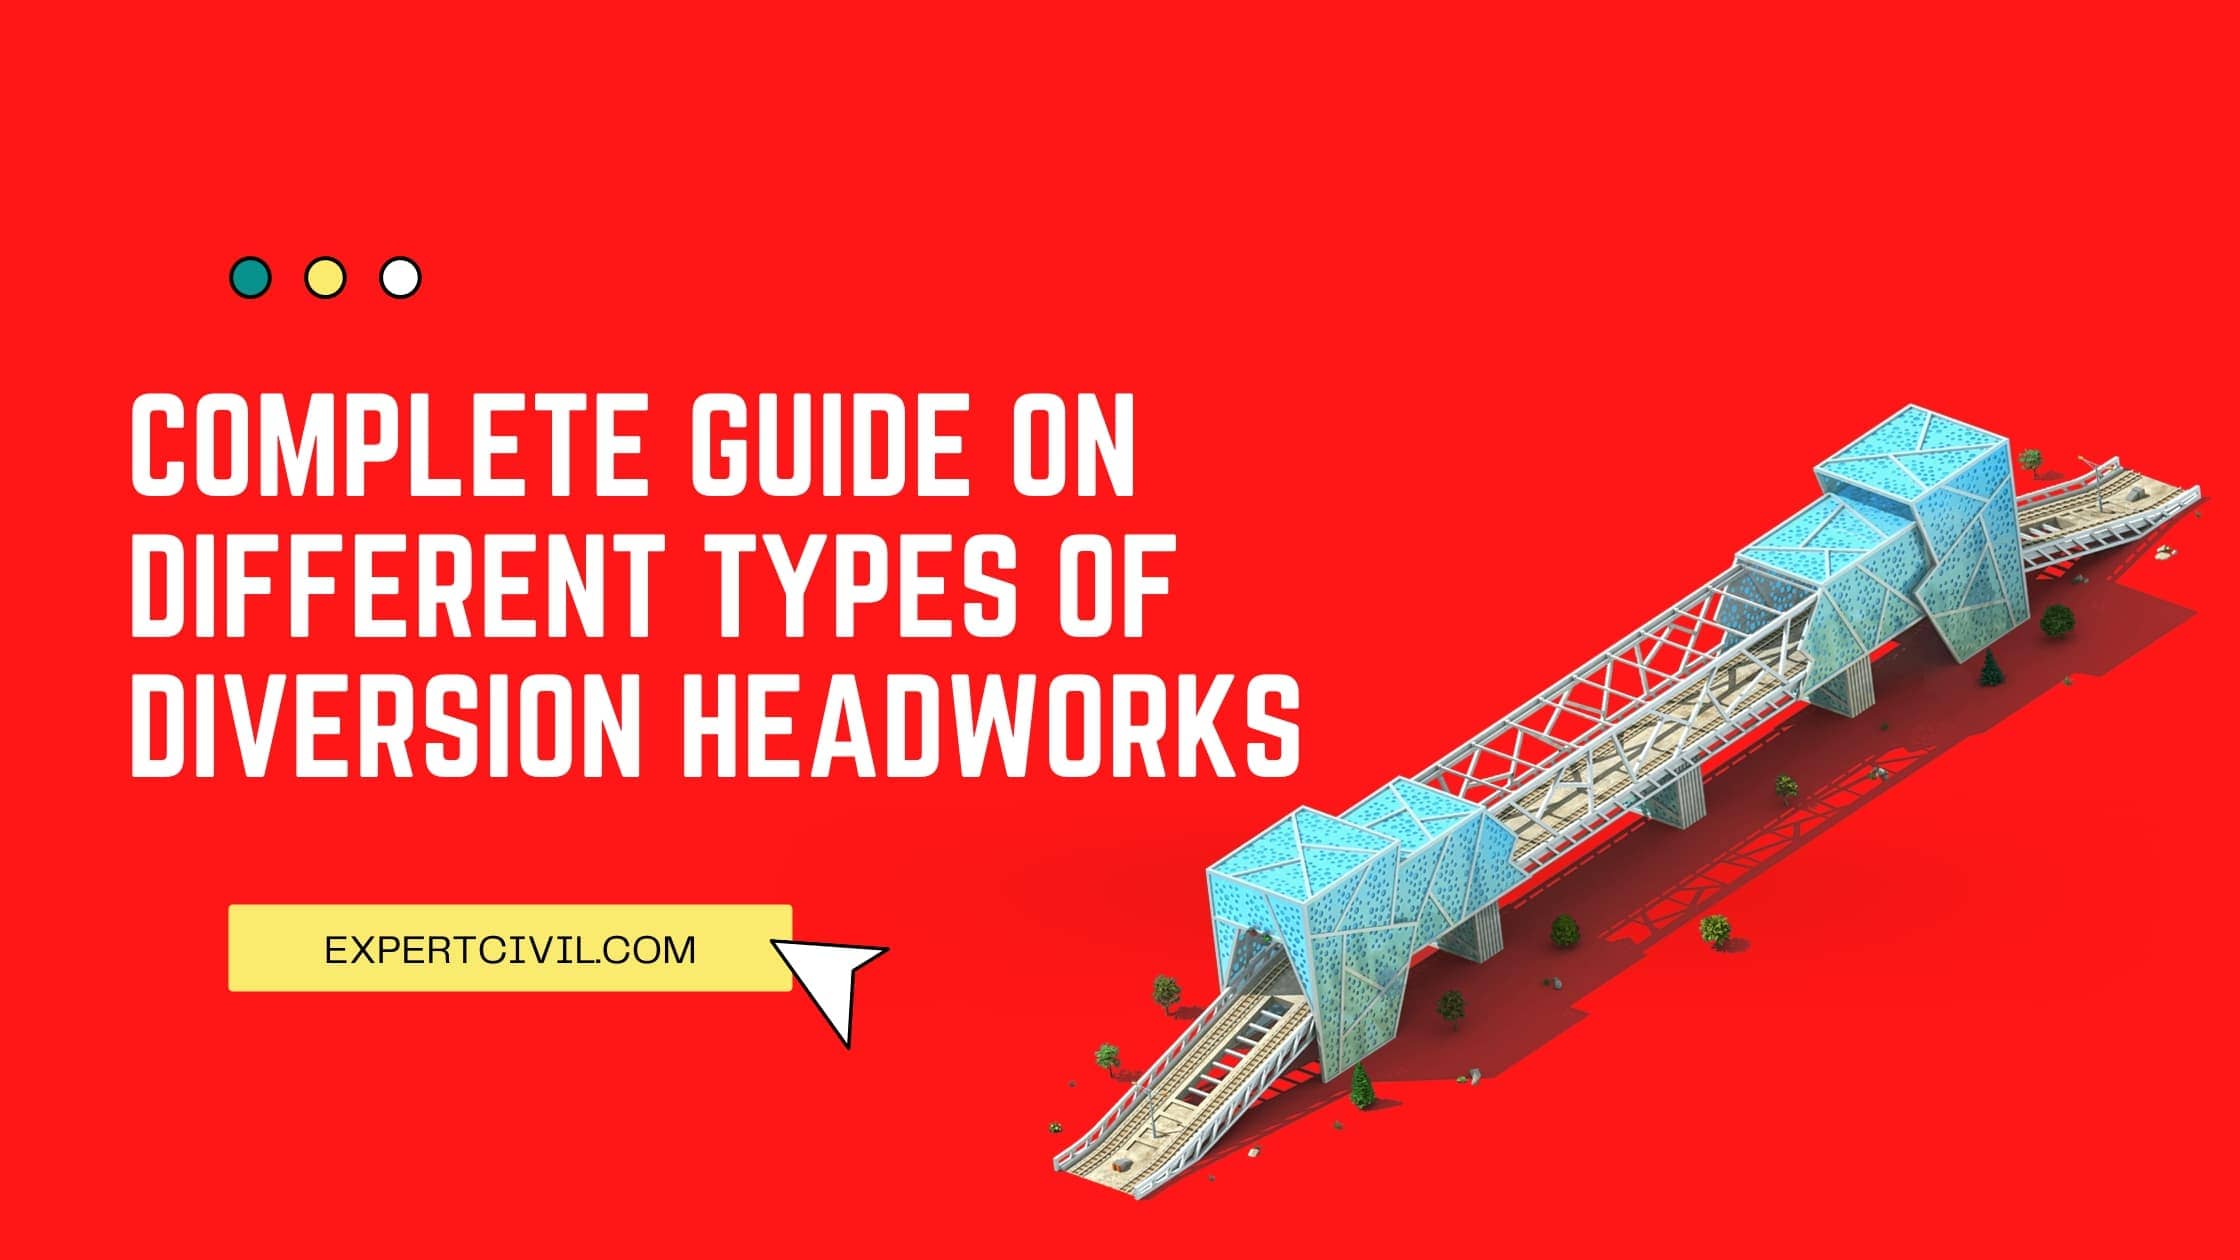 Diversion Headworks: Different Types and Components of Diversion Headworks